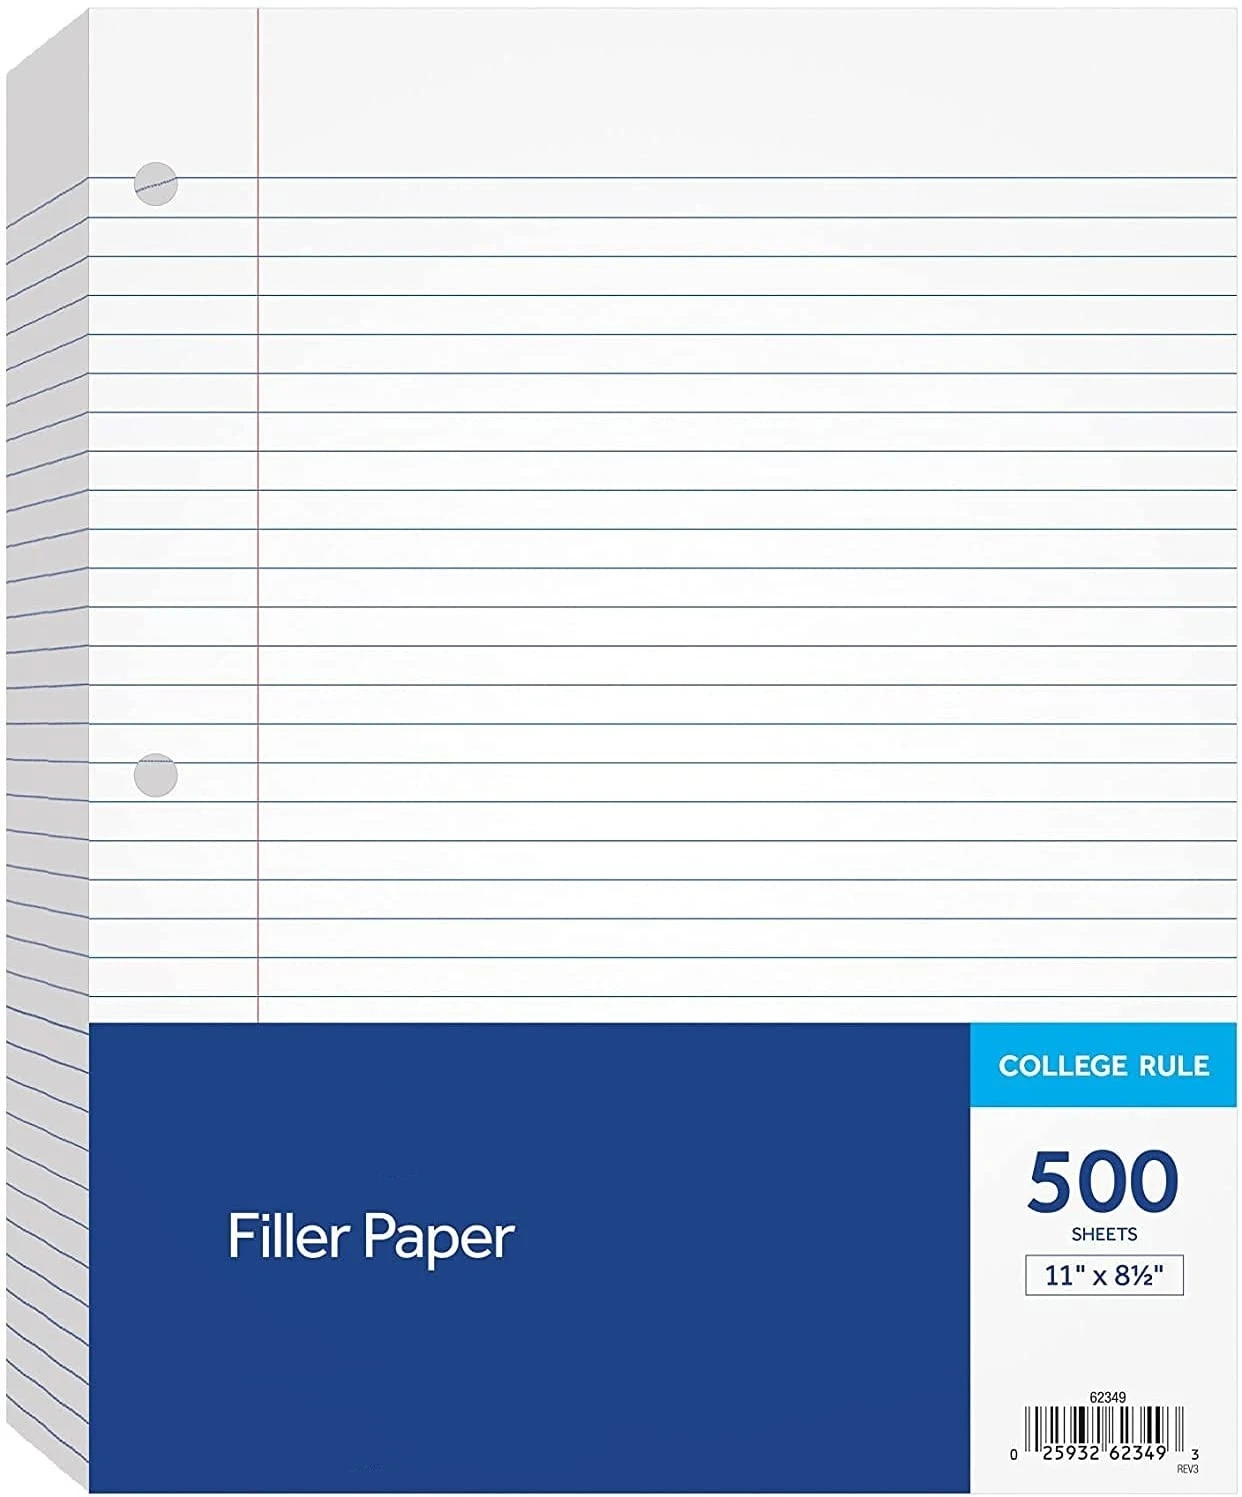 ,White 3-Hole Punched Loose-Leaf Paper for 3-Ring Binders 8-1/2 x 11 500 Sheets Per Pack 62349 Filler Paper College Rule 1 Pack 